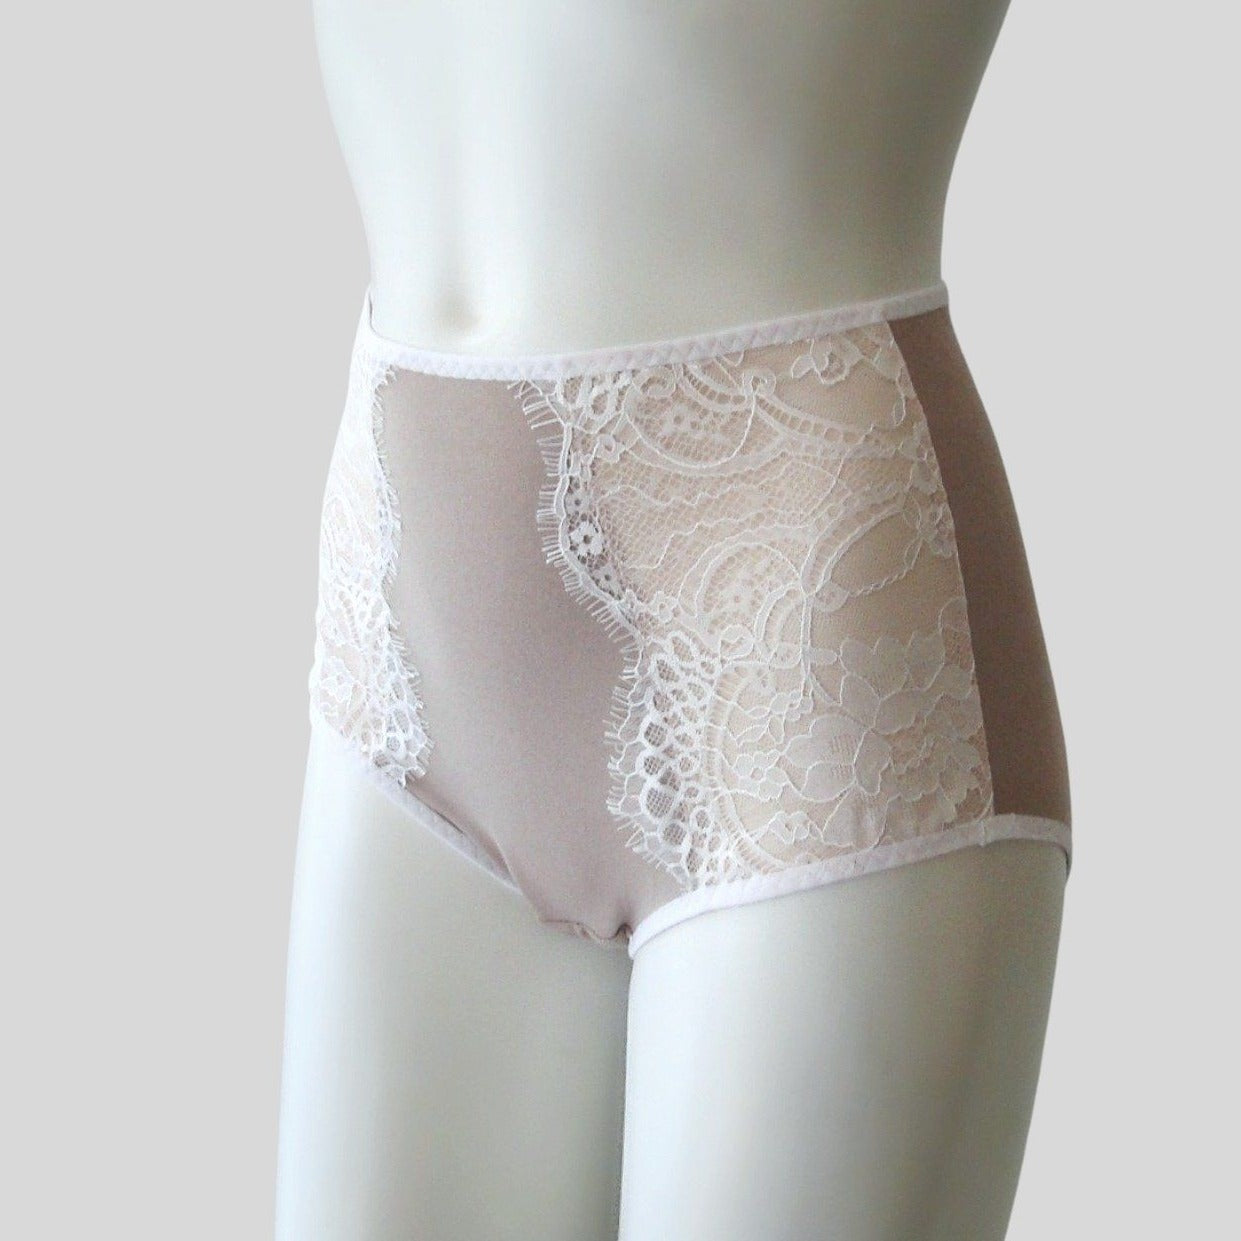 Shop high waisted panties Canada | organic cotton underwear for women boutique